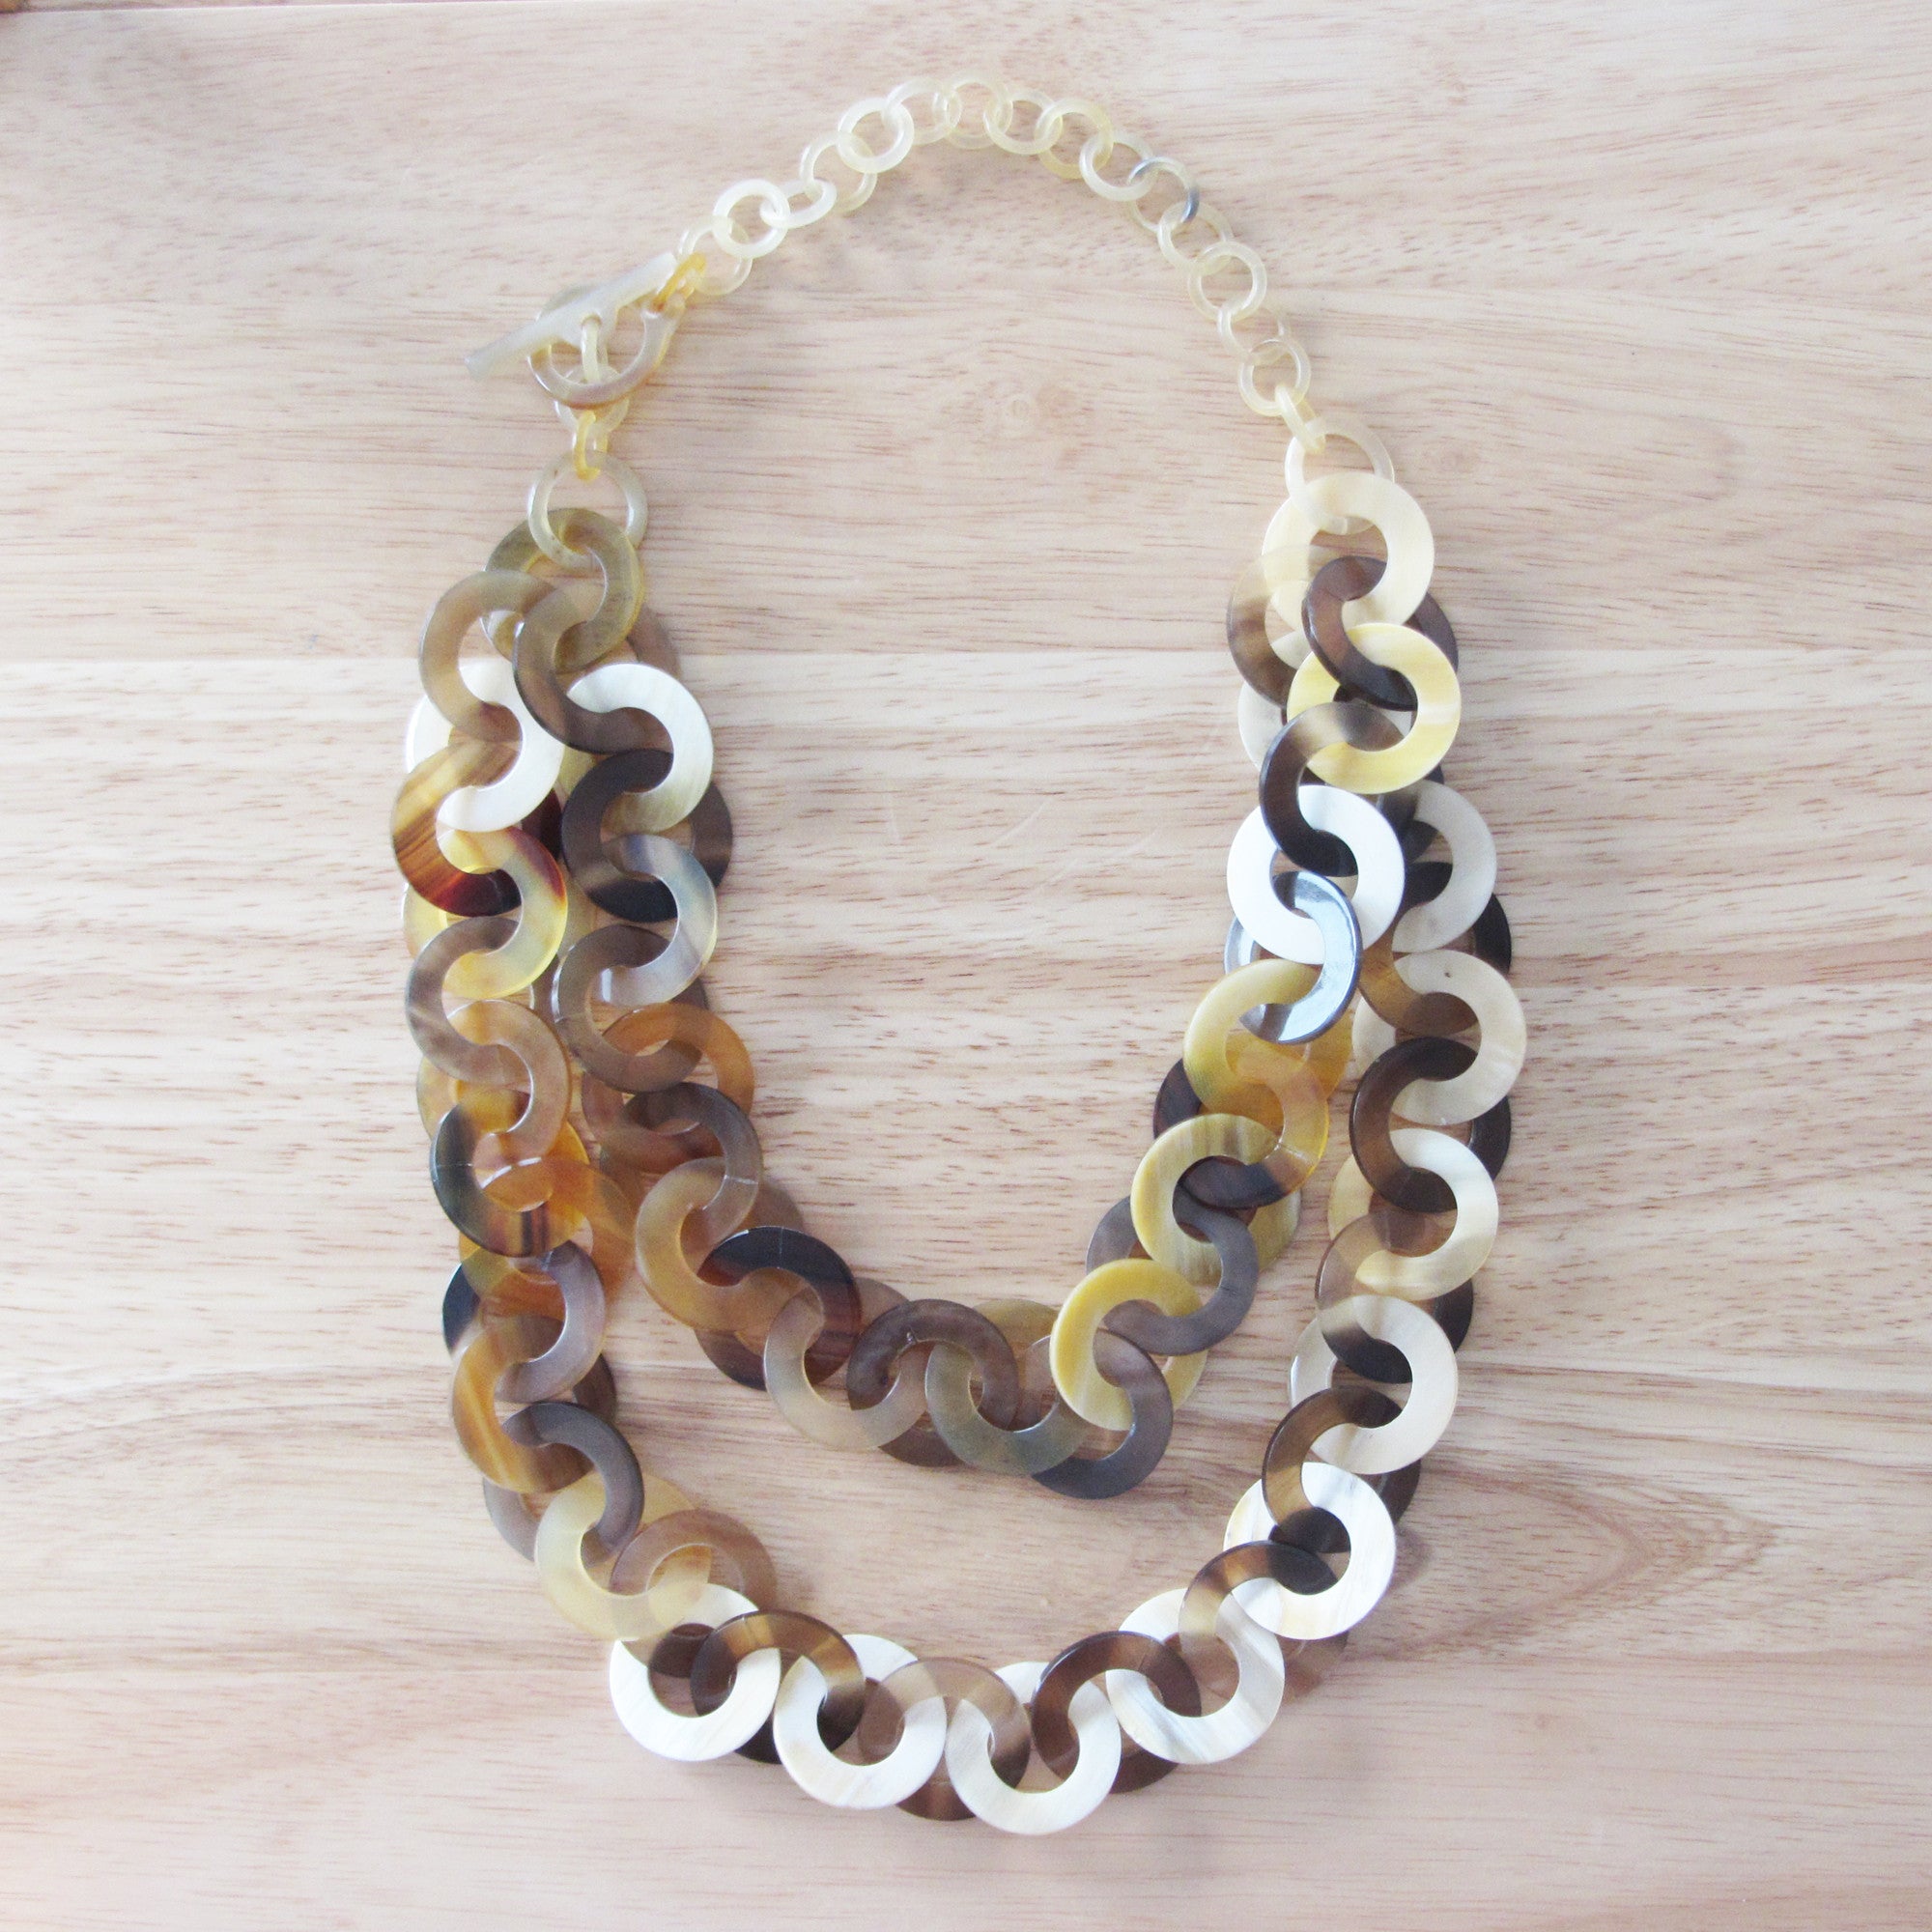 Charm necklace, layer link chain buffalo horn necklace